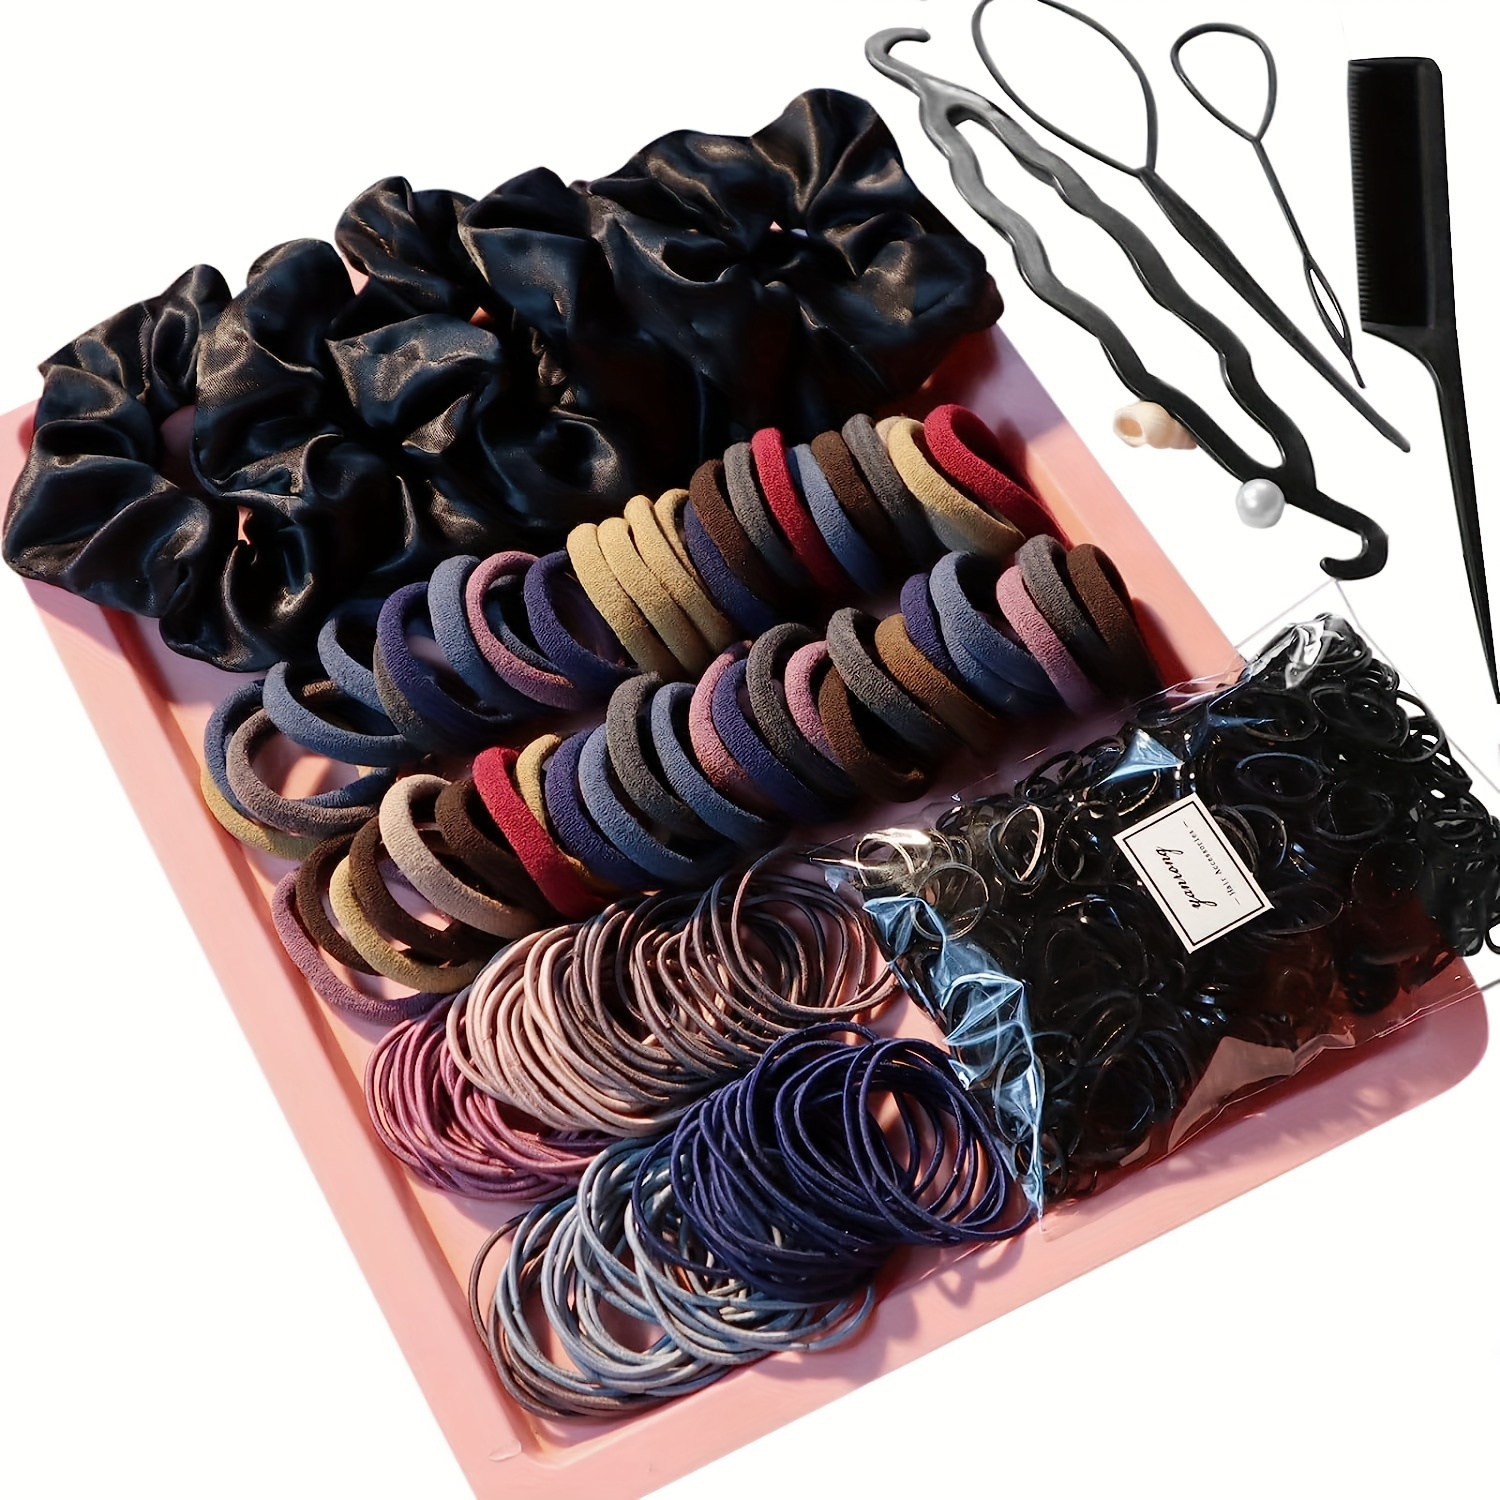 

A Set Of Large Intestine Hair Accessories (769 Pieces) With Various Options For Hair Ties, Simple Hair Ropes, And Hair Circle Combinations.